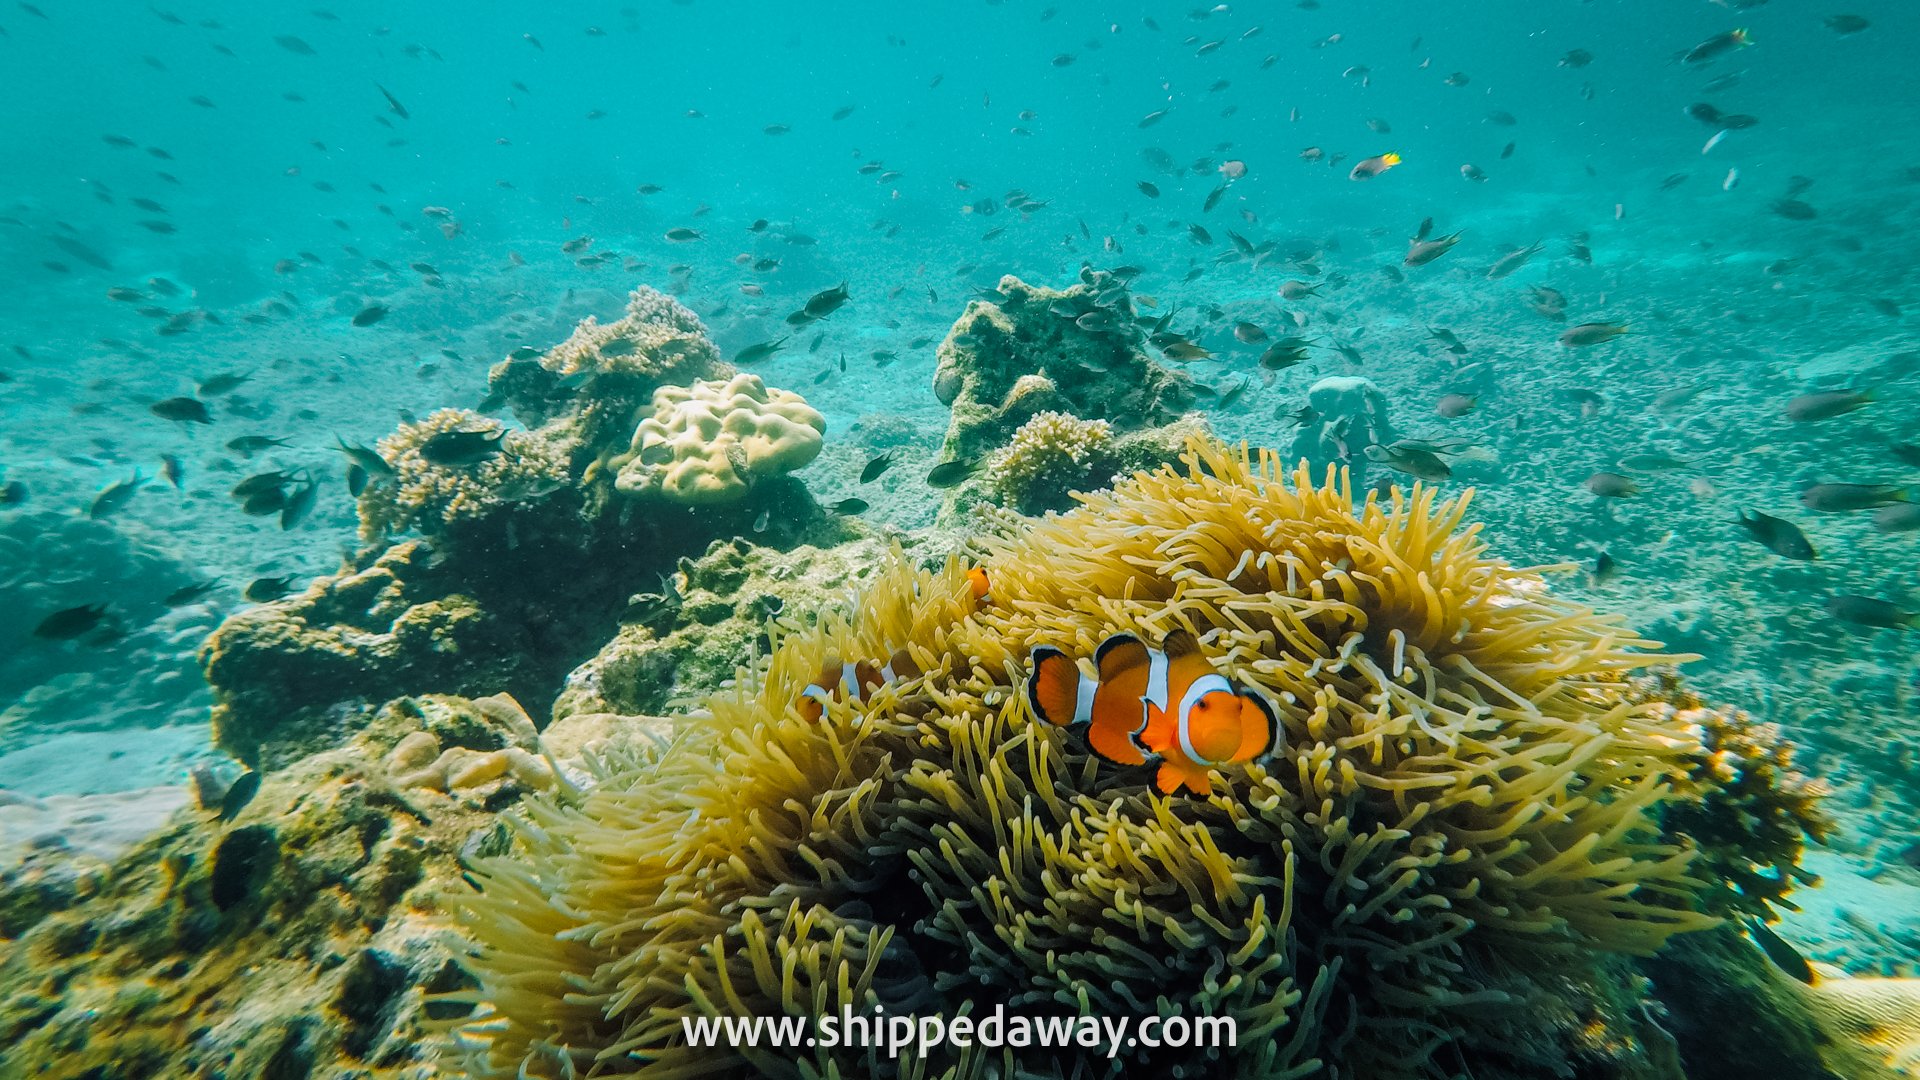 Finding Nemo clownfish among corals - snorkeling, best thing to do in Phi Phi Islands